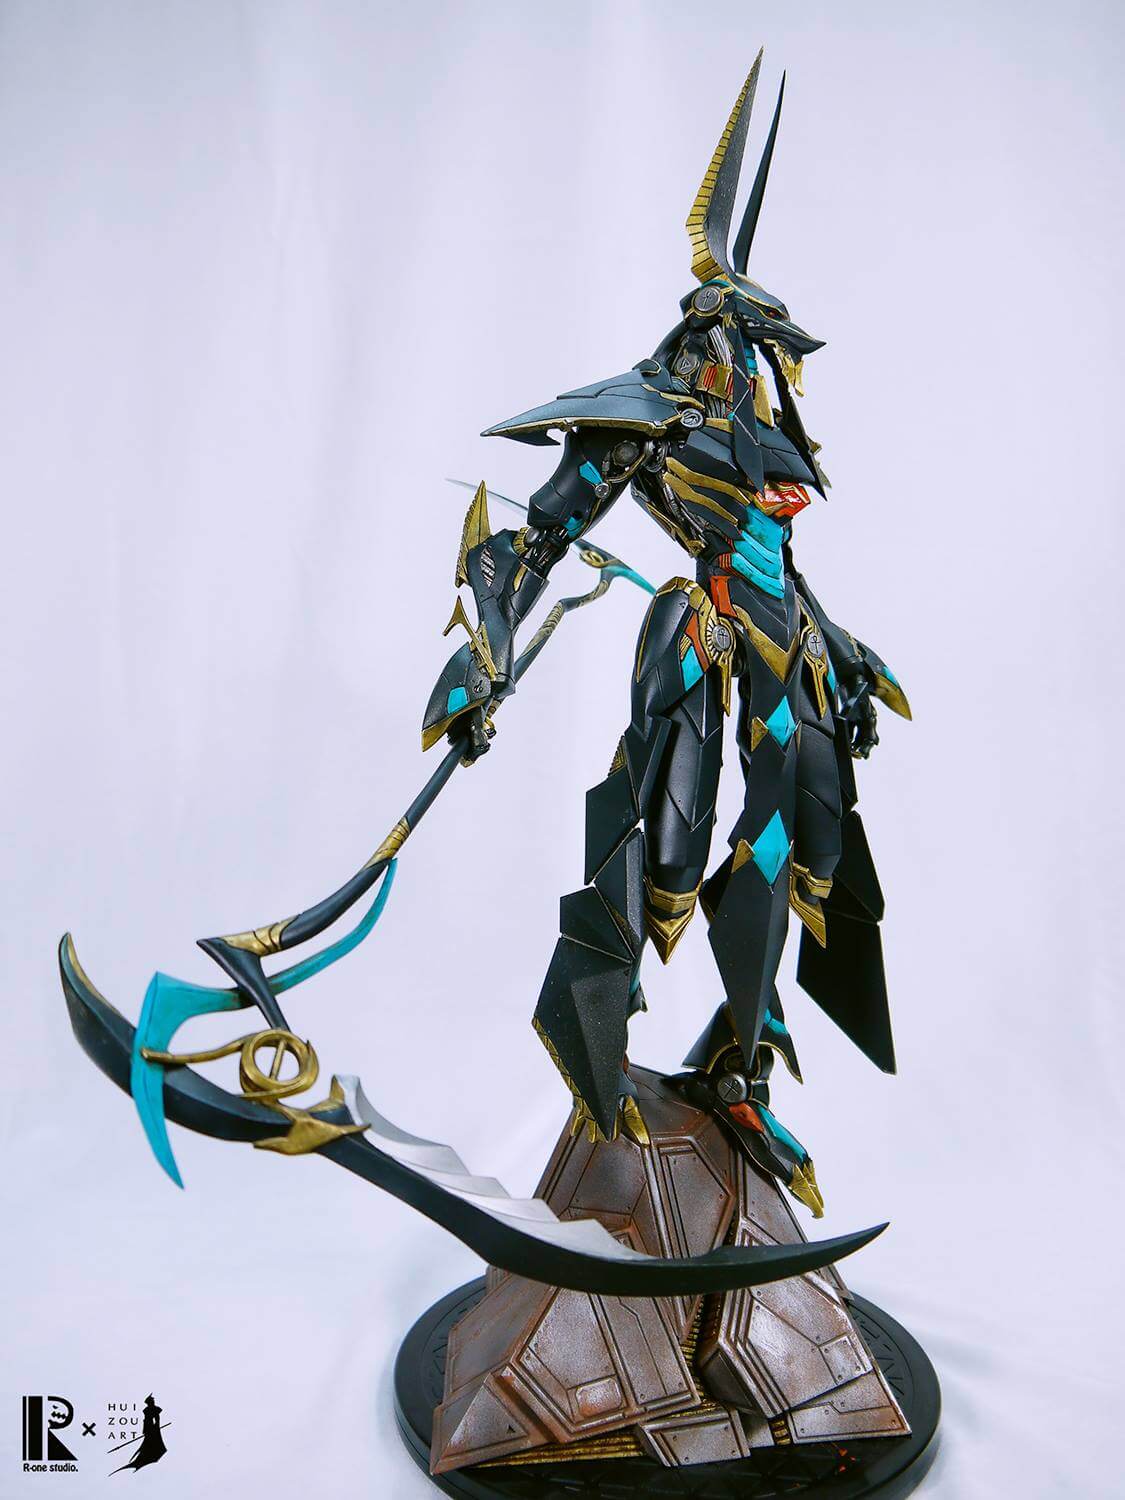 Anubis Trial Toy Hui Undead Chronicle By x R-One - Art Zou Studio The